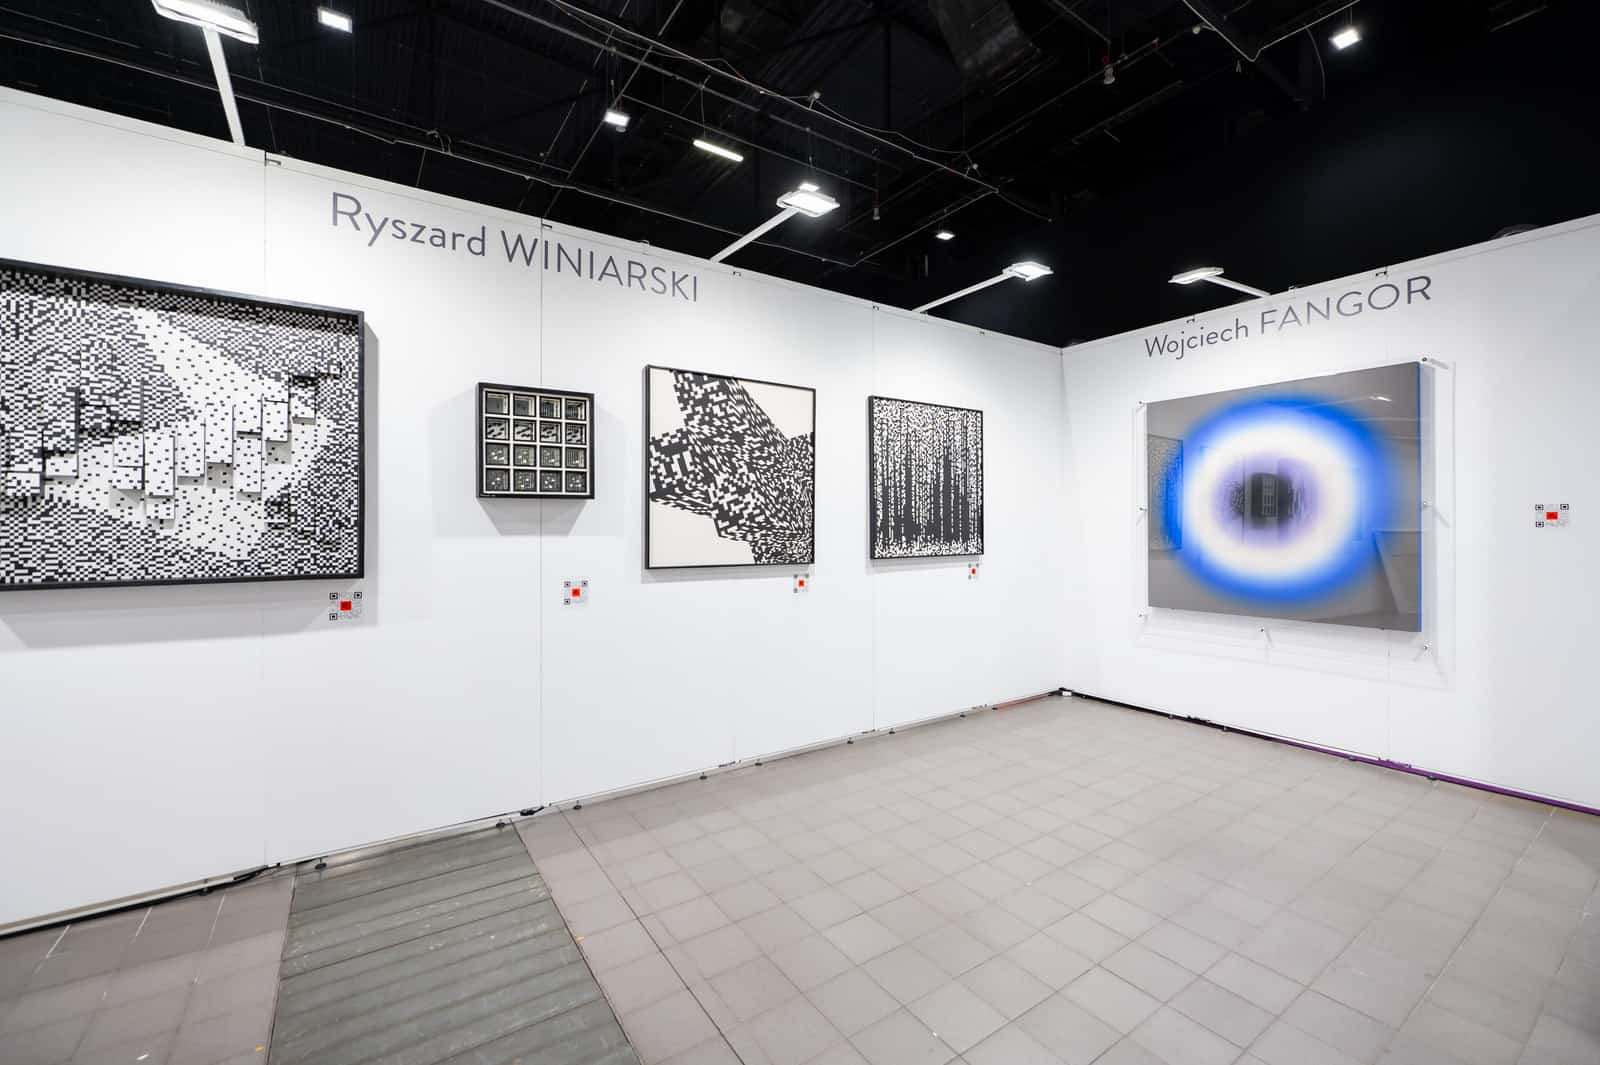 Rytel collection, Warsaw Art Fair, by courtesy of the Warsaw Art Fair.